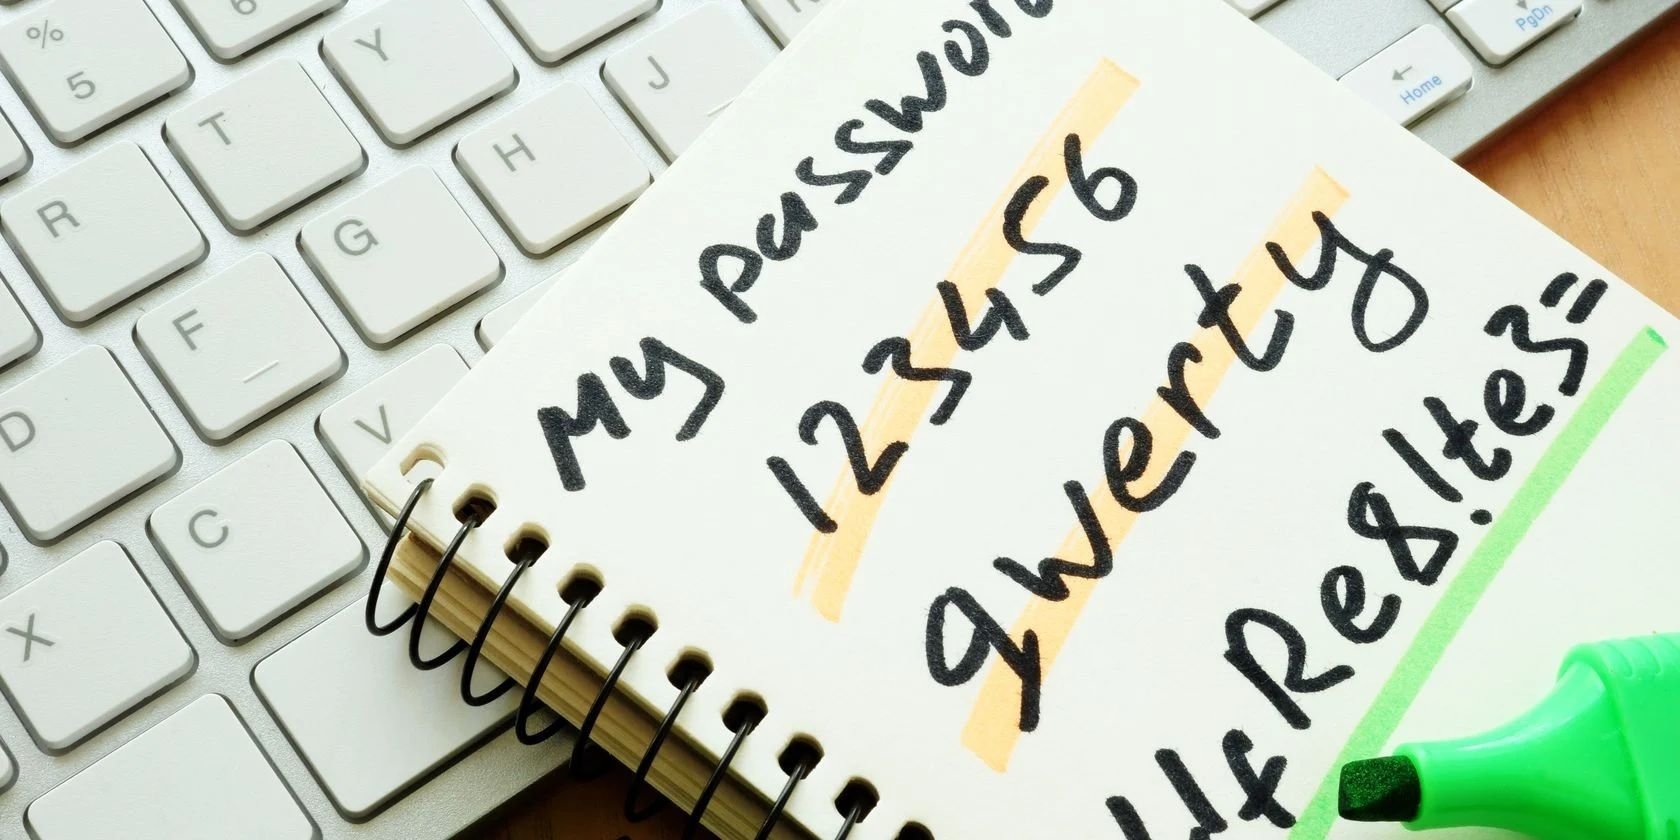 What Is the Best Password Manager for Your Device?